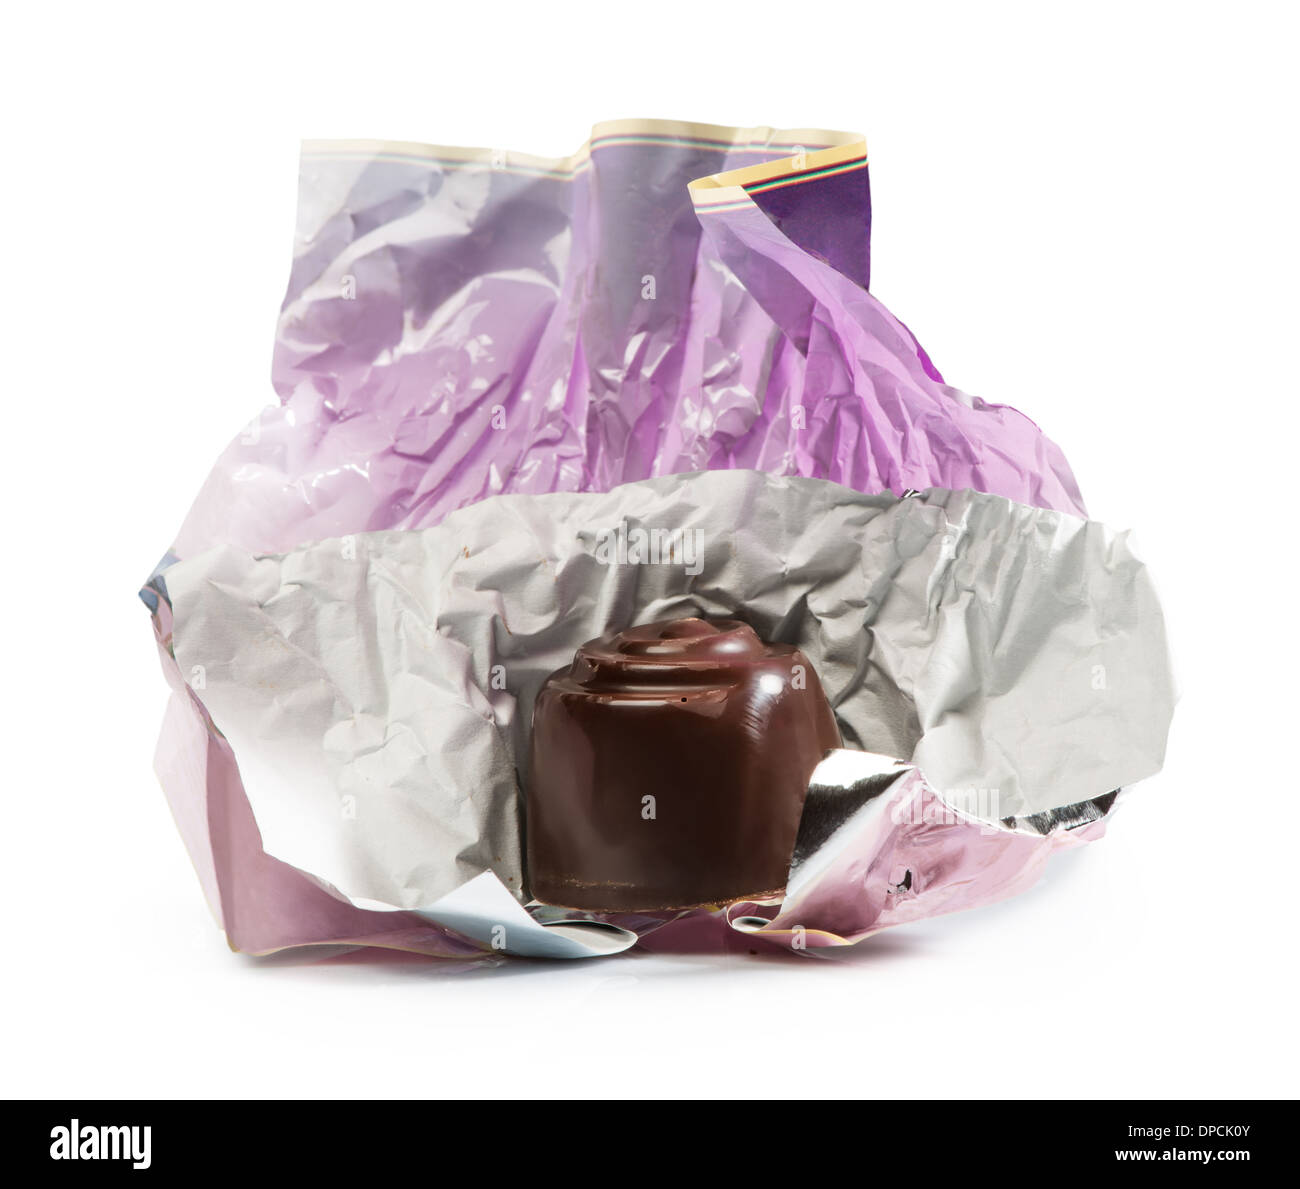 Chocolate and its packaging Stock Photo